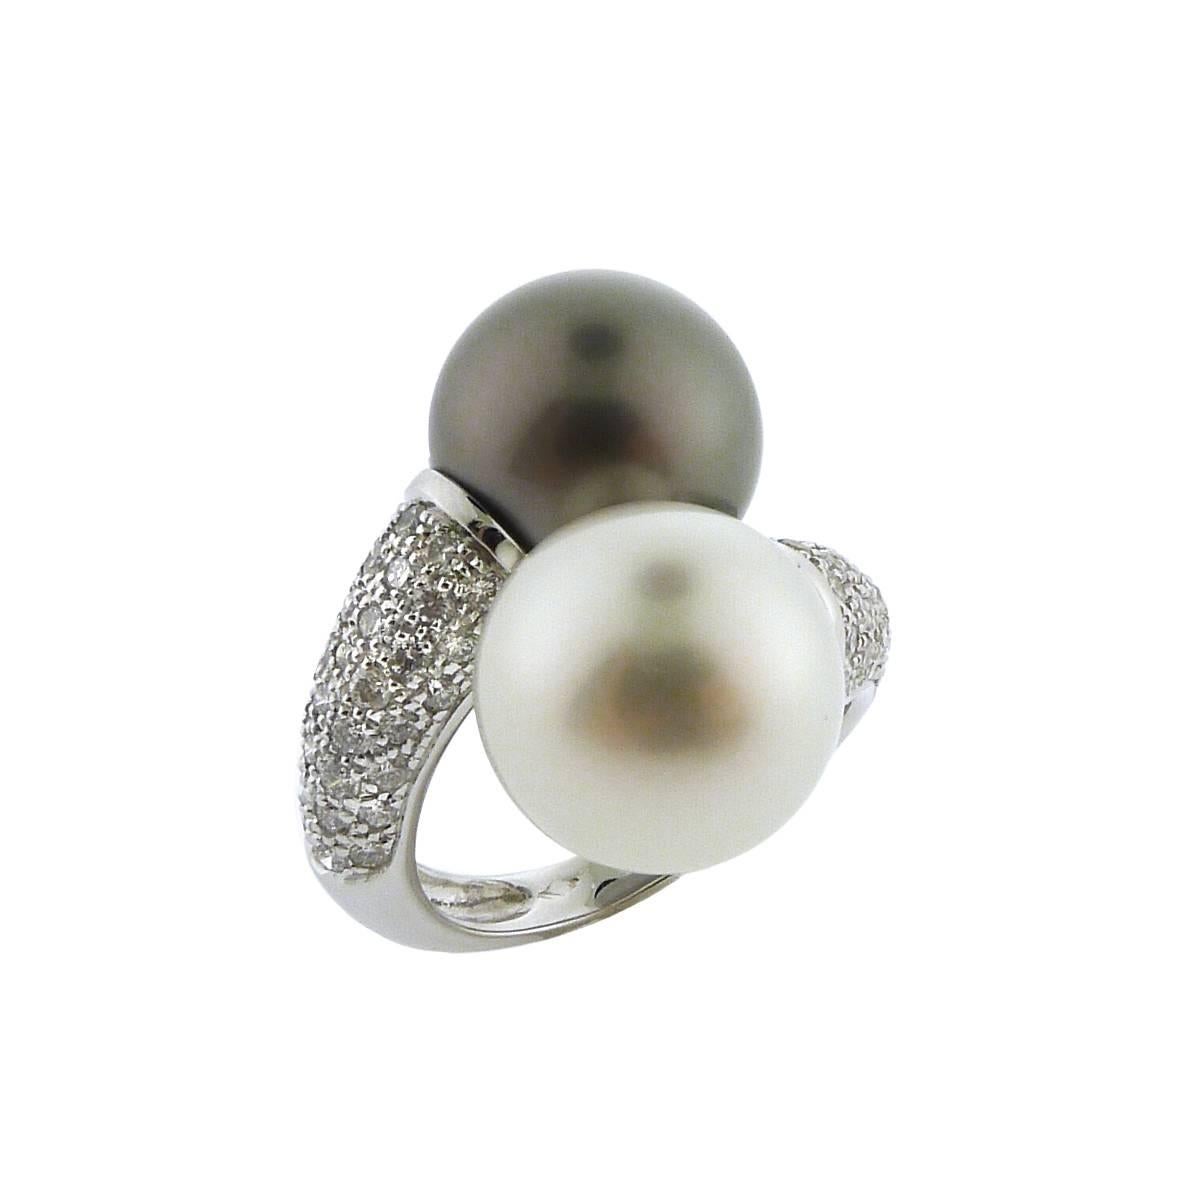 Two large, fully round pearls measure 12.7 mm each, have excellent luster and are blemish free. 1.20 carats of G color, VS-SI clarity diamonds are pavé set in 18K white gold. The ring measures 1 inch from top to bottom, 0.75 inches across, and sits